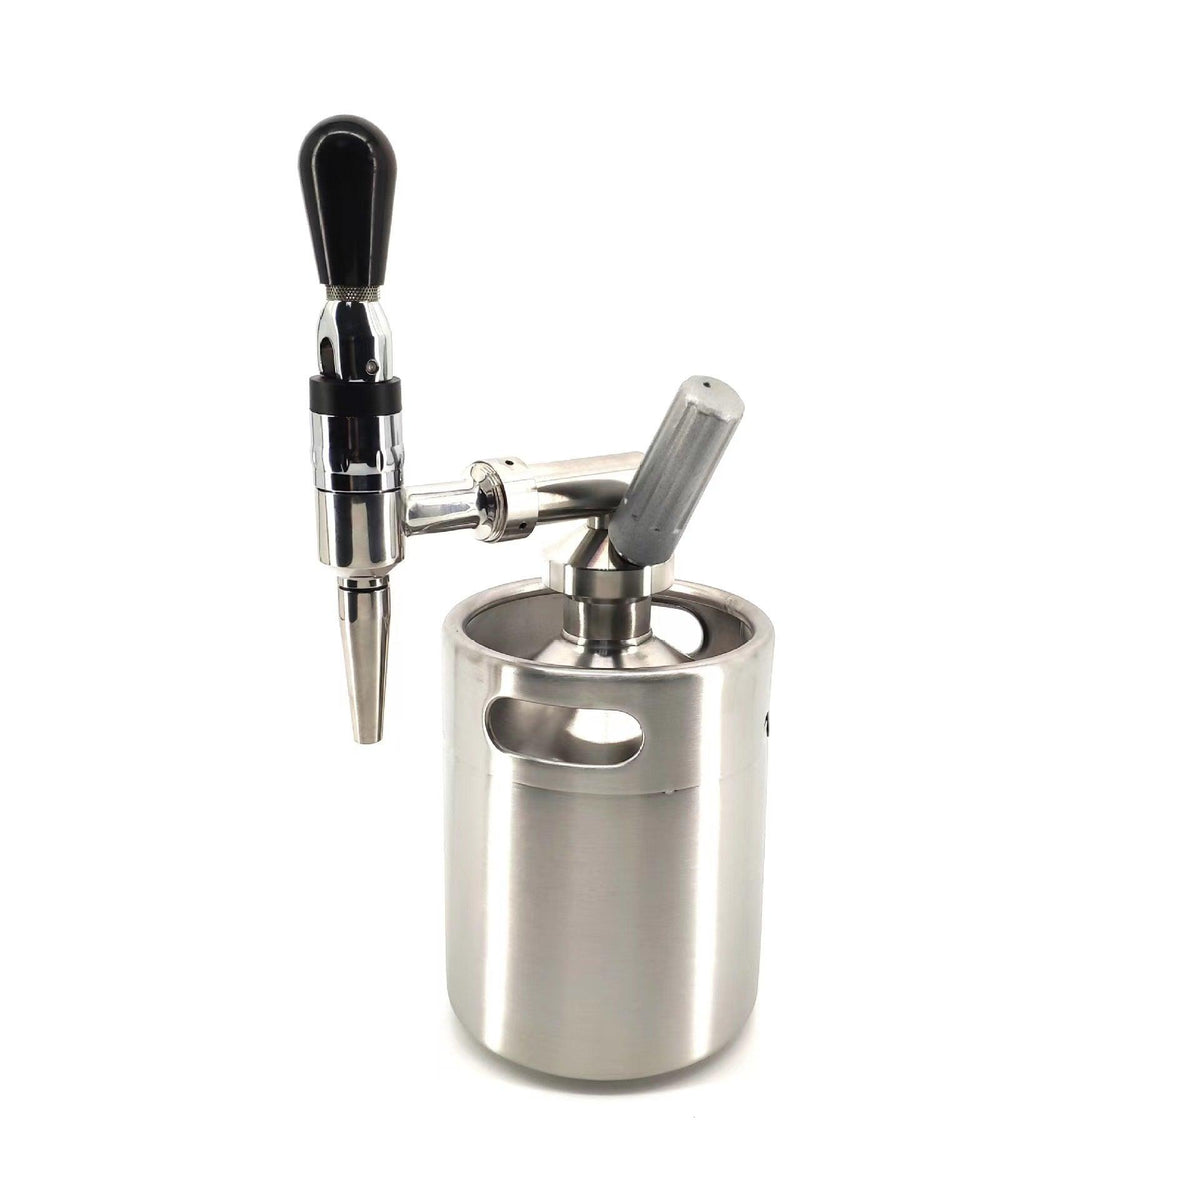 https://highimpactcoffee.com/collections/brew-gear/products/nitrogen-coffee-machine-stainless-steel-coffee-barrel